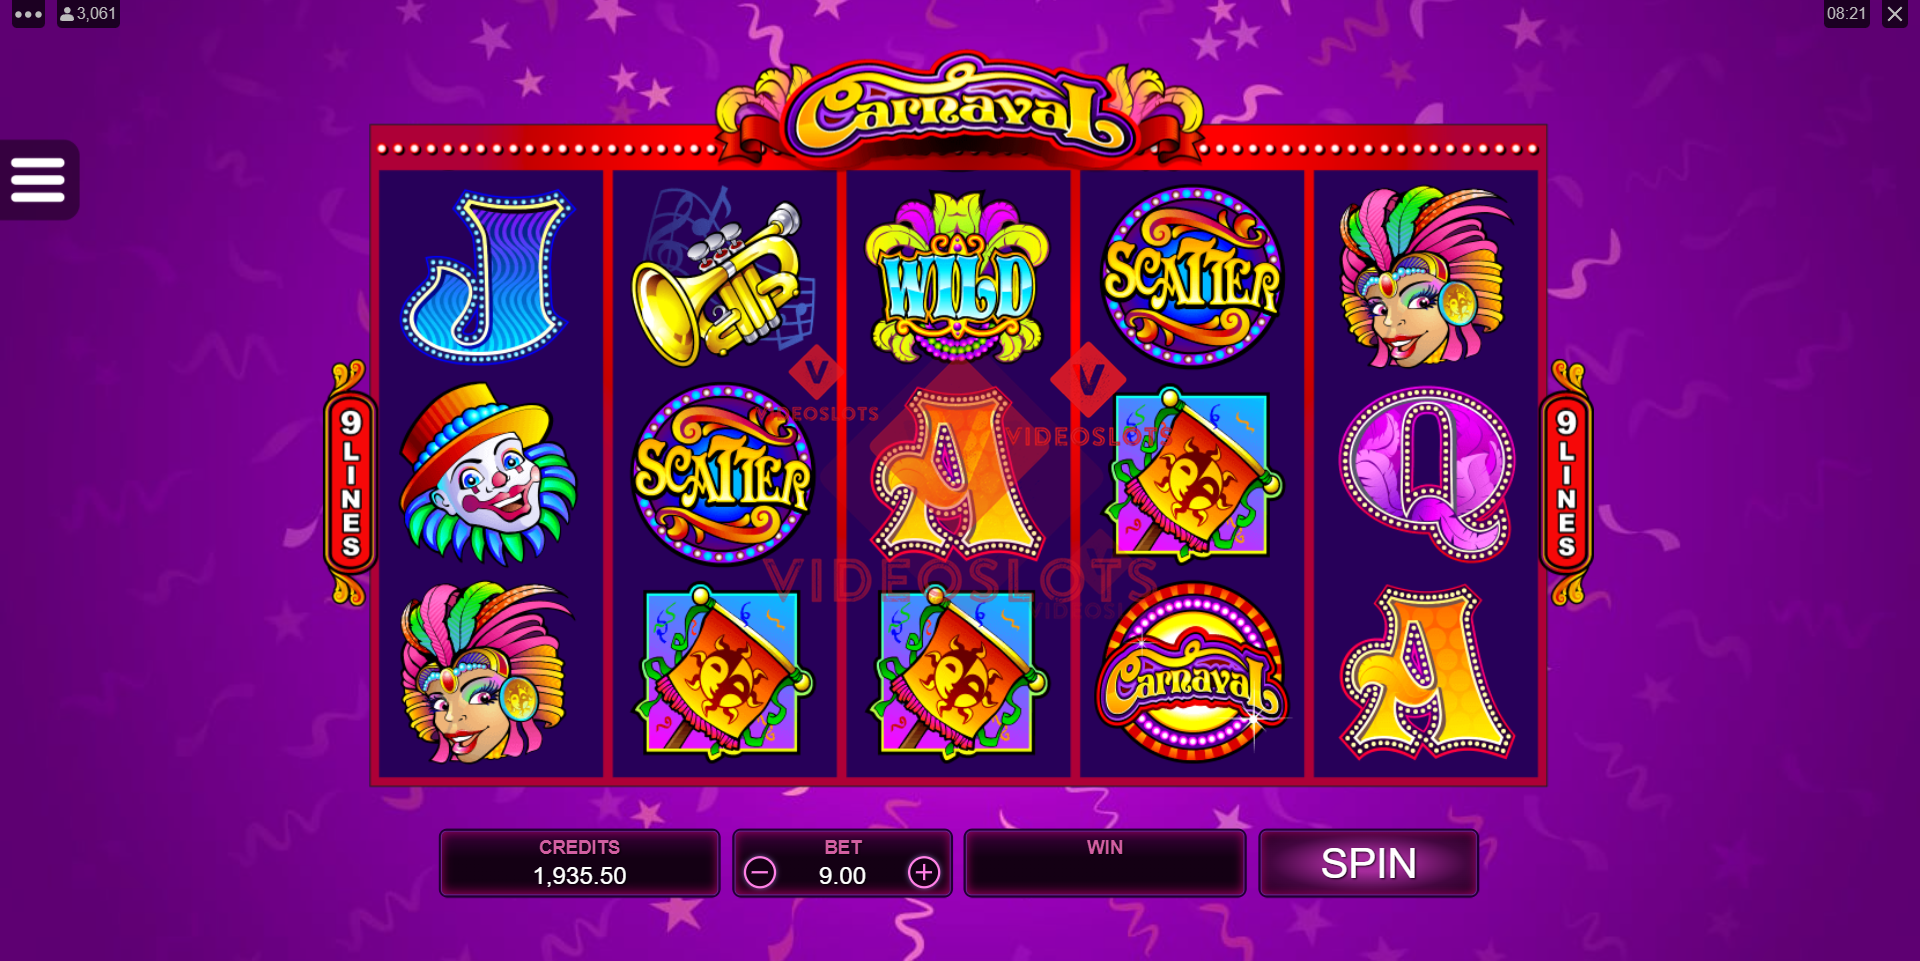 Base Game for Carnaval slot for Microgaming